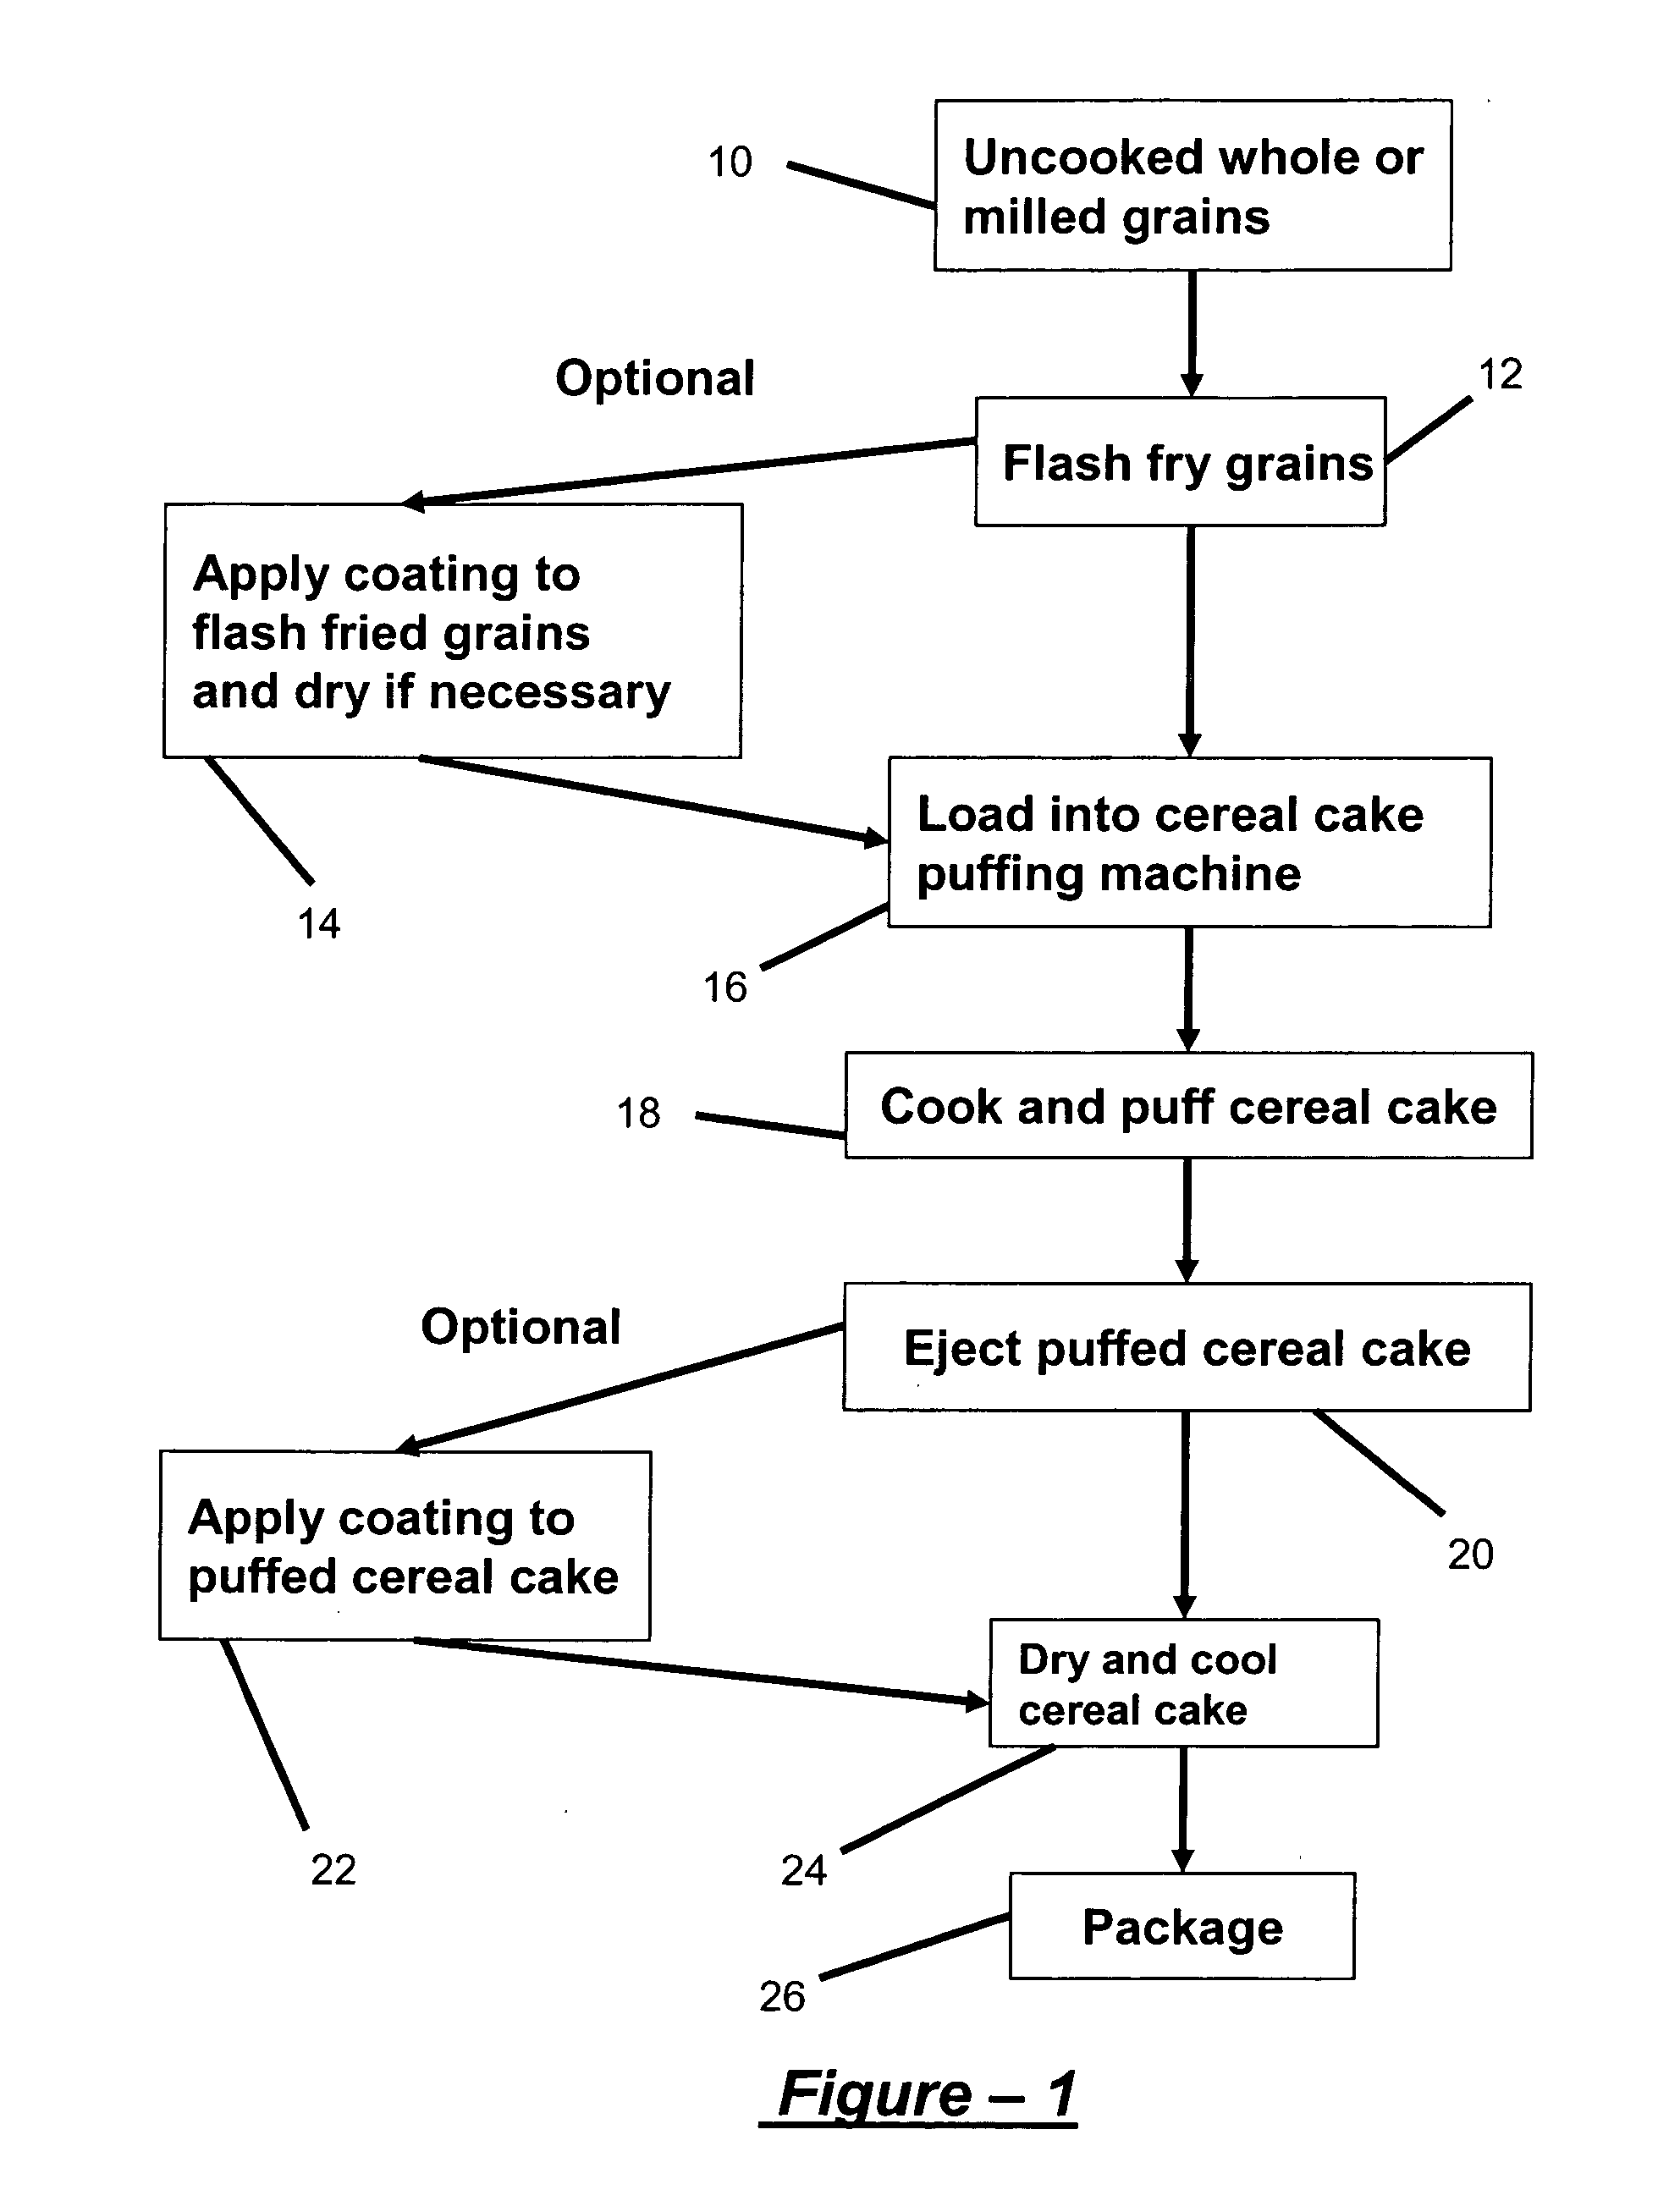 Method for formation of puffed cereal cakes